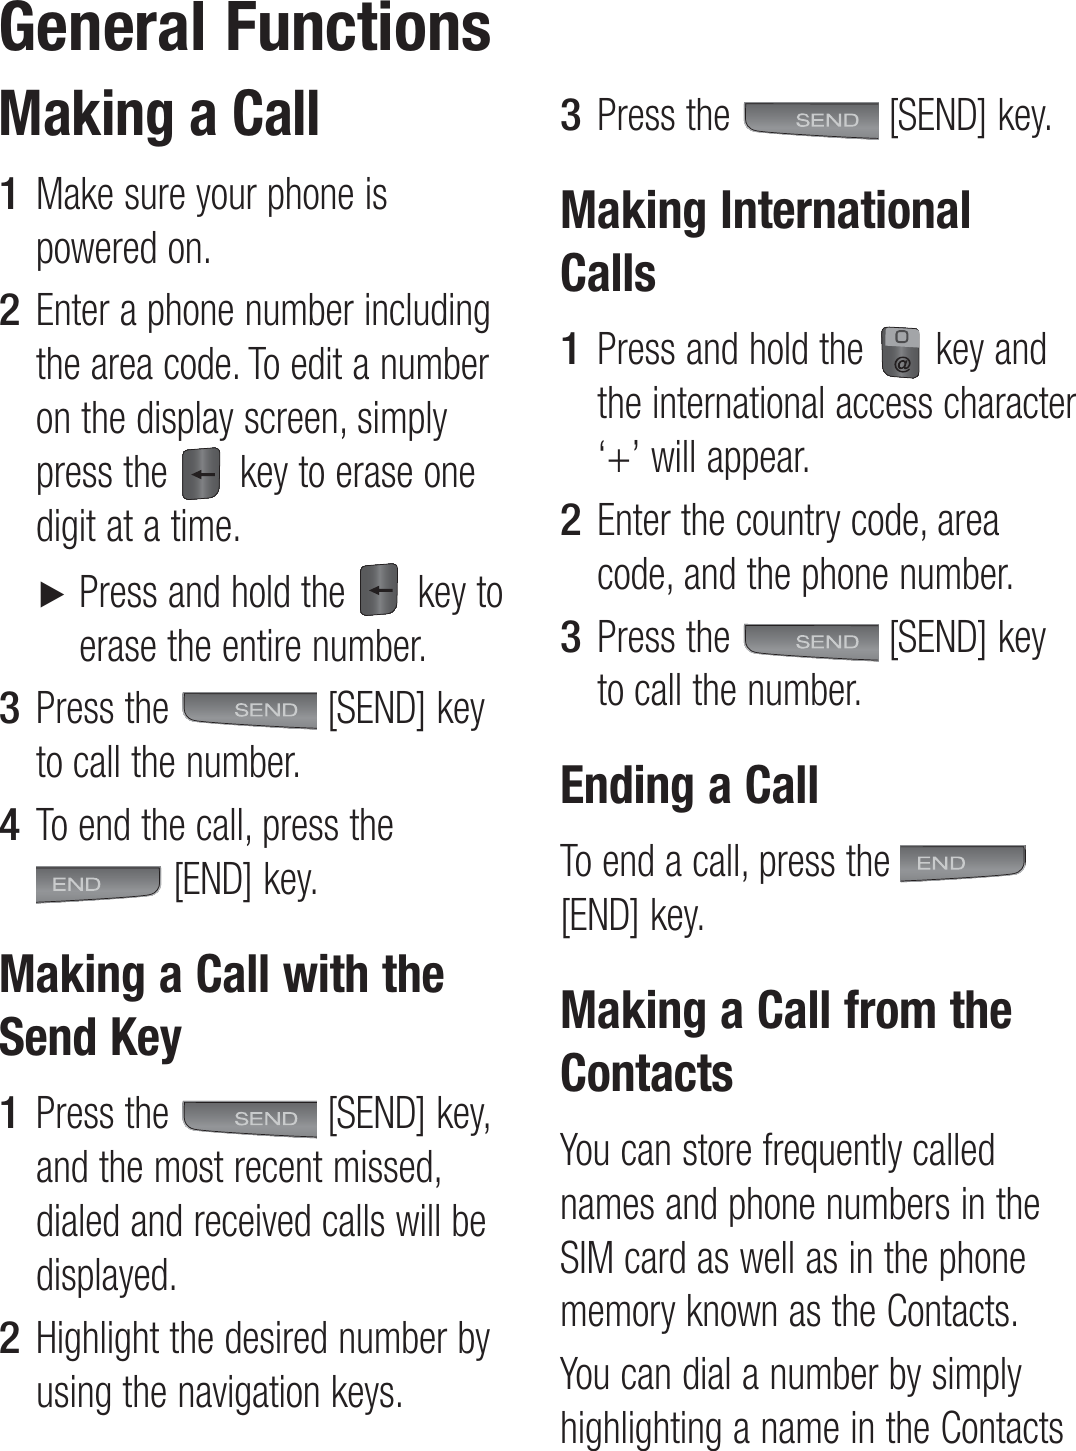 Making a CallMake sure your phone is powered on.Enter a phone number including the area code. To edit a number on the display screen, simply press the   key to erase one digit at a time. ►  Press and hold the   key to erase the entire number.Press the   [SEND] key to call the number.To end the call, press the [END] key.Making a Call with the Send KeyPress the   [SEND] key, and the most recent missed, dialed and received calls will be displayed.Highlight the desired number by using the navigation keys.1 2 3 4 1 2 Press the   [SEND] key.Making International CallsPress and hold the   key and the international access character ‘+’ will appear.Enter the country code, area code, and the phone number.Press the   [SEND] key to call the number.Ending a CallTo end a call, press the   [END] key.Making a Call from the ContactsYou can store frequently called names and phone numbers in the SIM card as well as in the phone memory known as the Contacts.You can dial a number by simply highlighting a name in the Contacts 3 1 2 3 General Functions